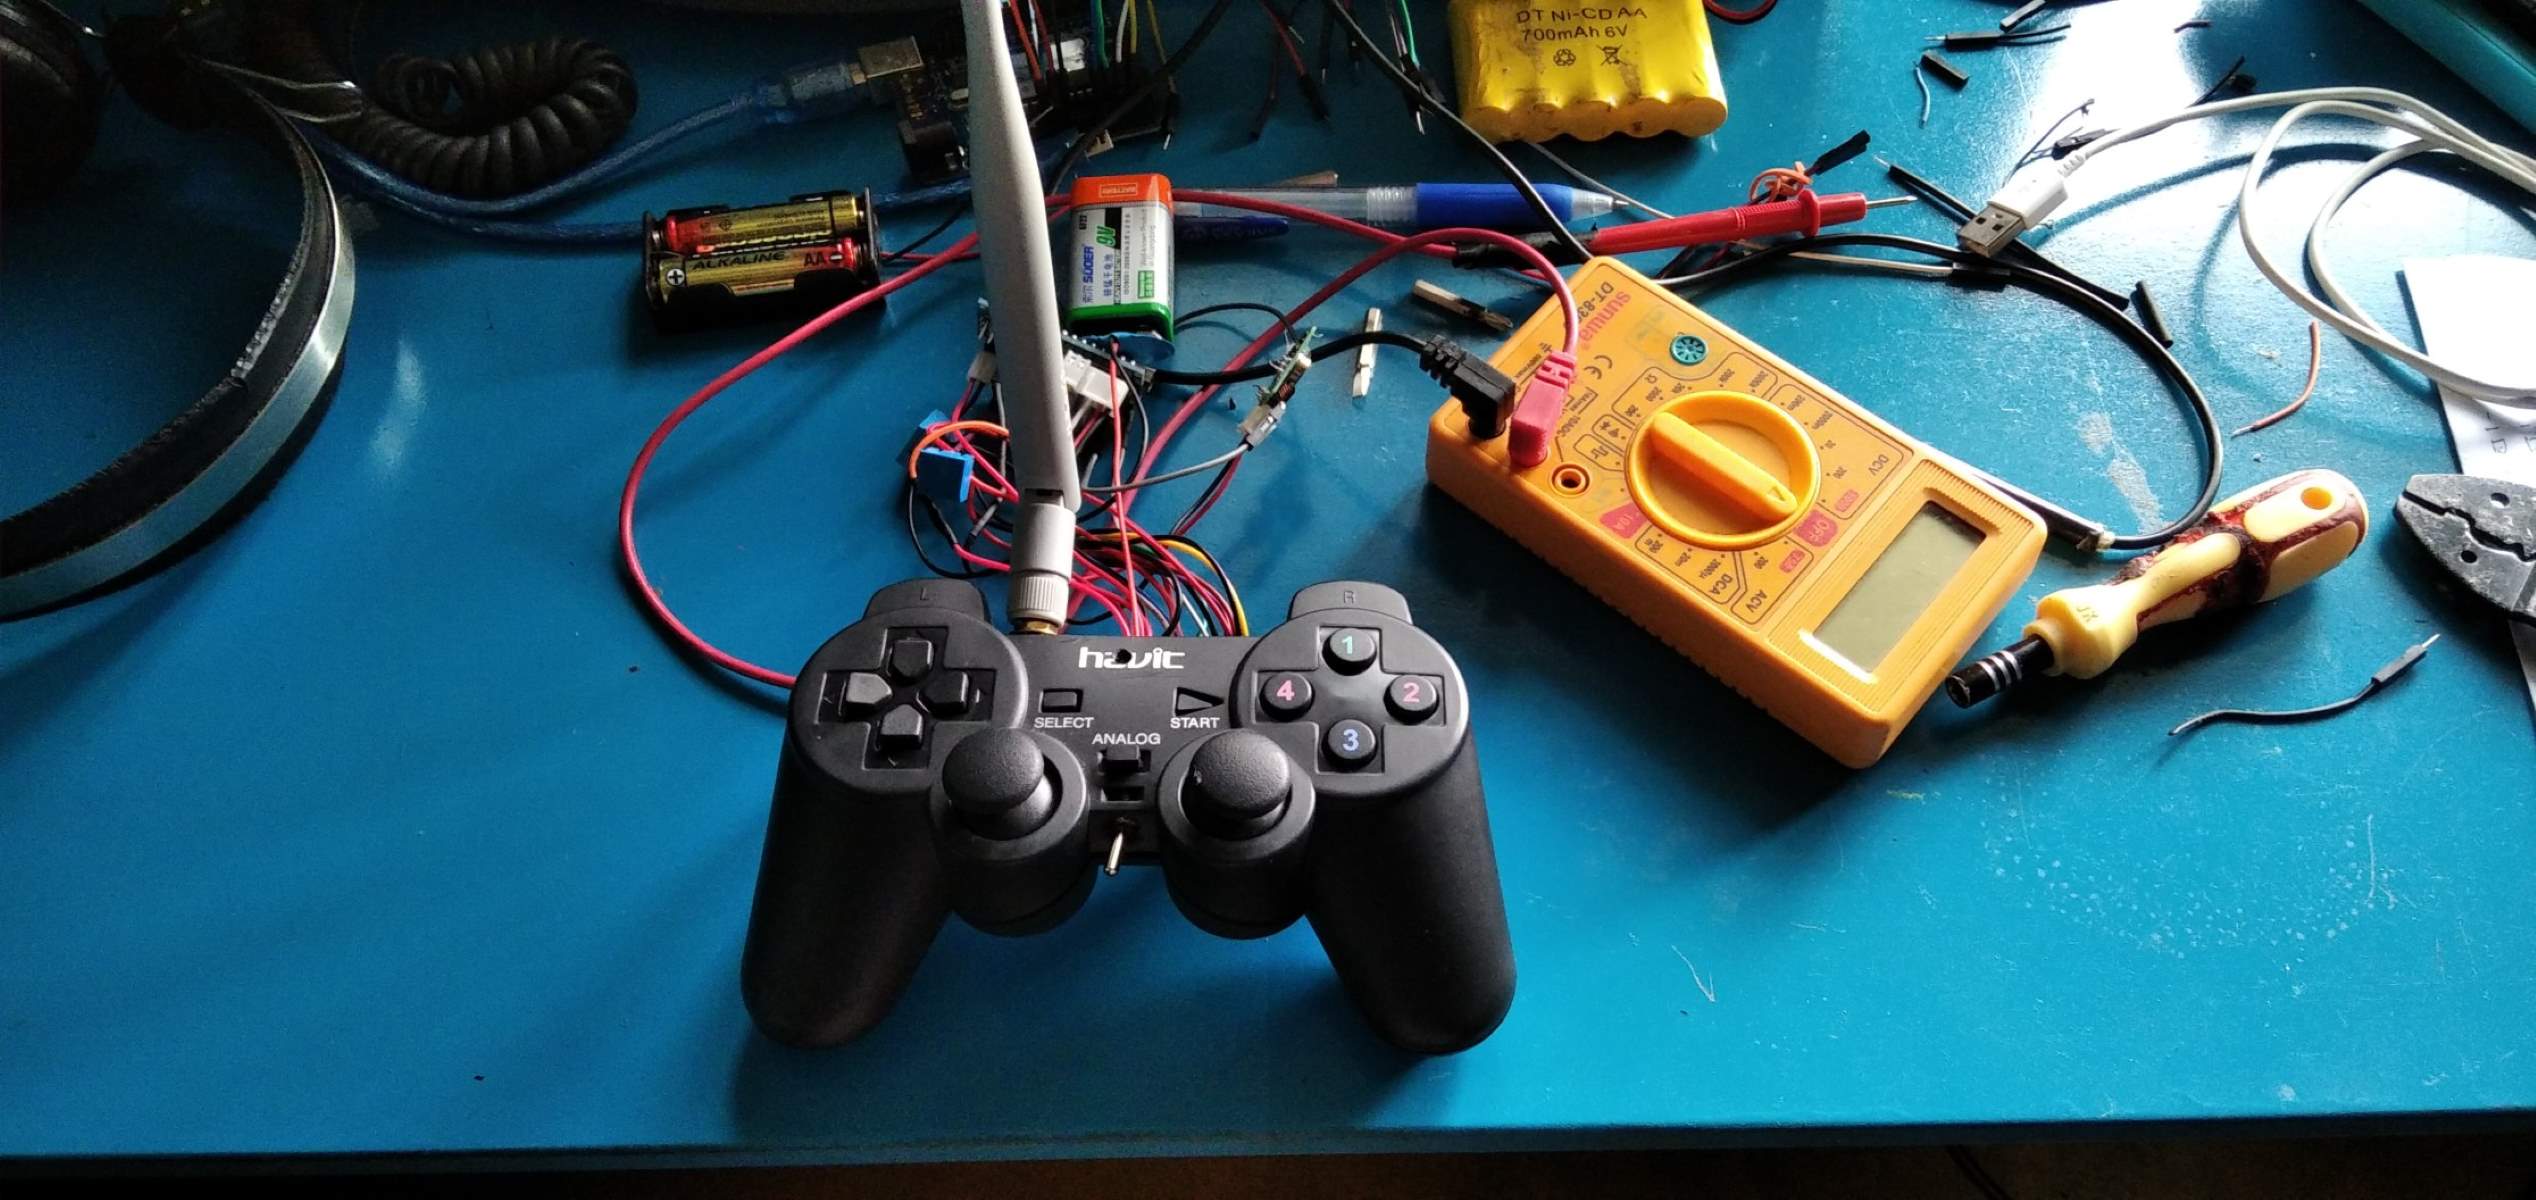 How To Make A Game Controller Out Of An Arduino Uno